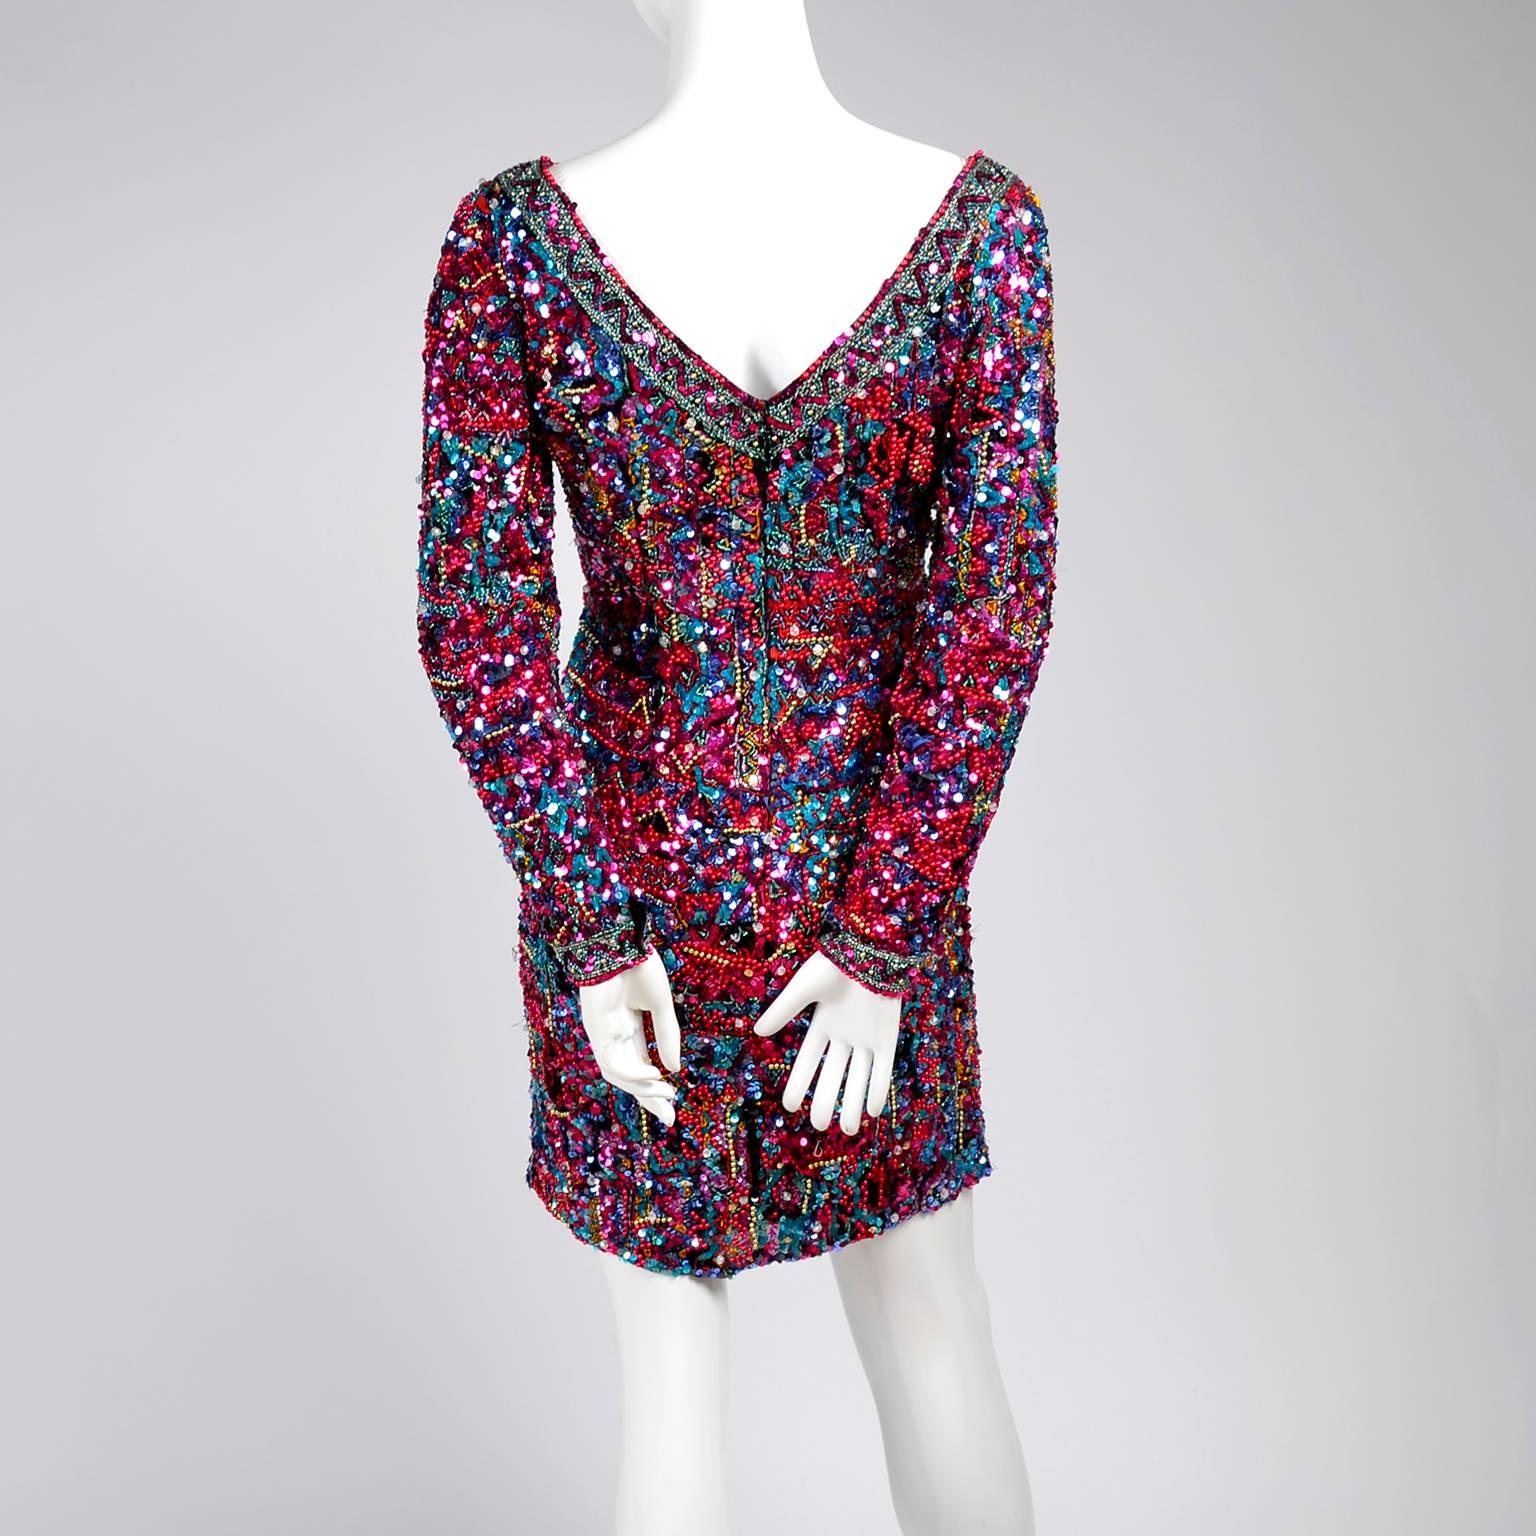 Women's Silk Oleg Cassini Vintage Dress With Colorful Sequins & Beaded 